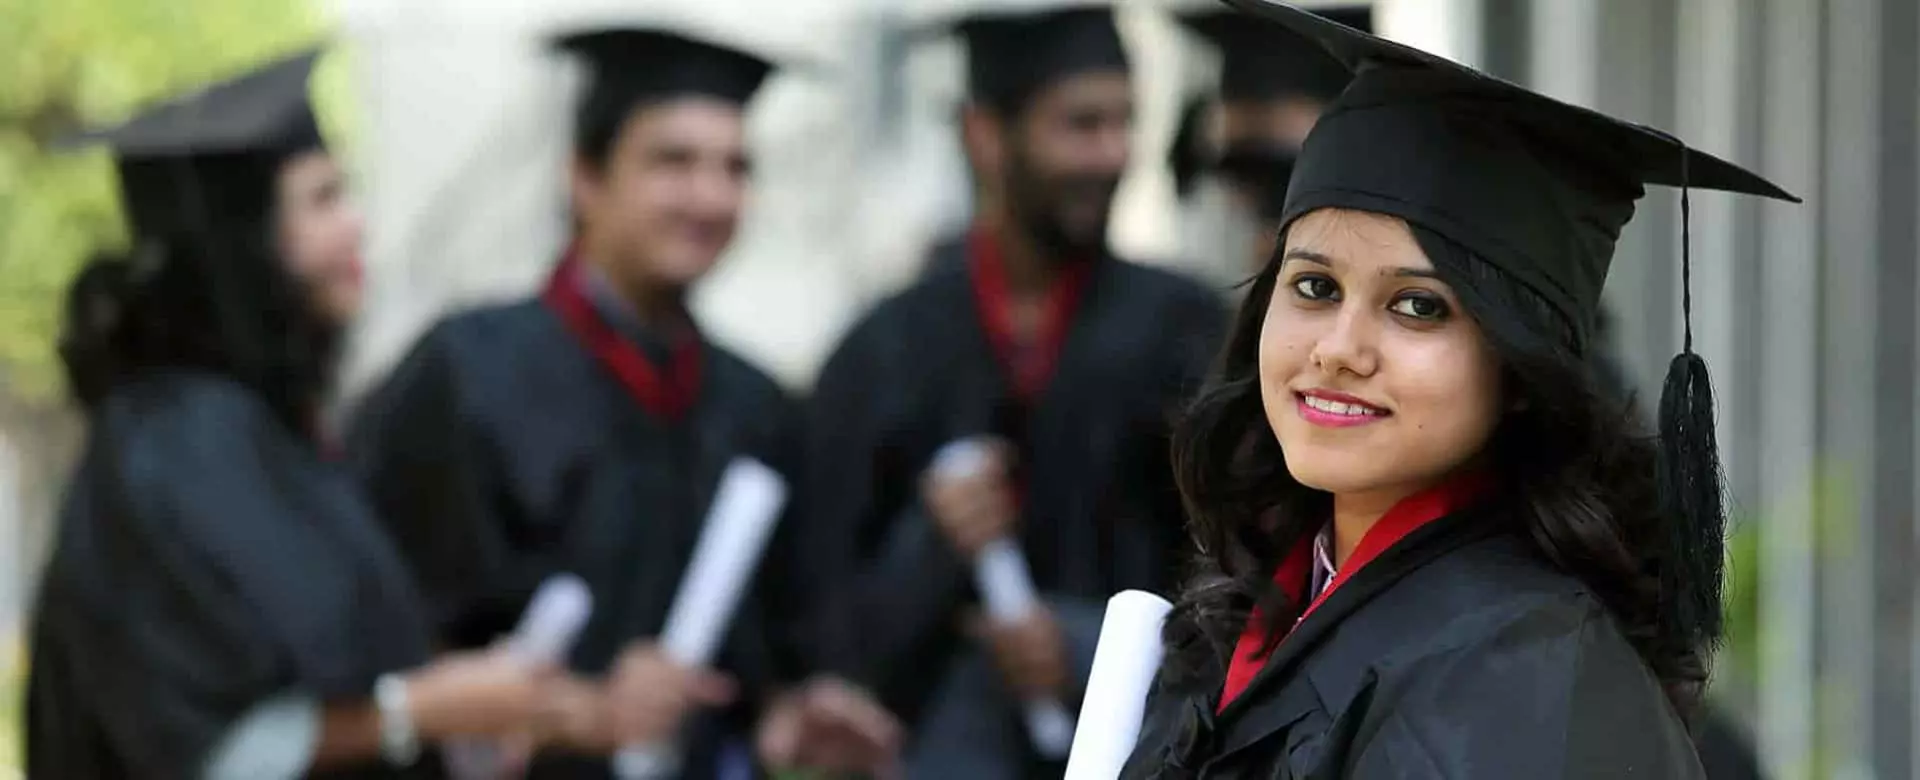 PGDM - Career Benefits of a Post graduate diploma course